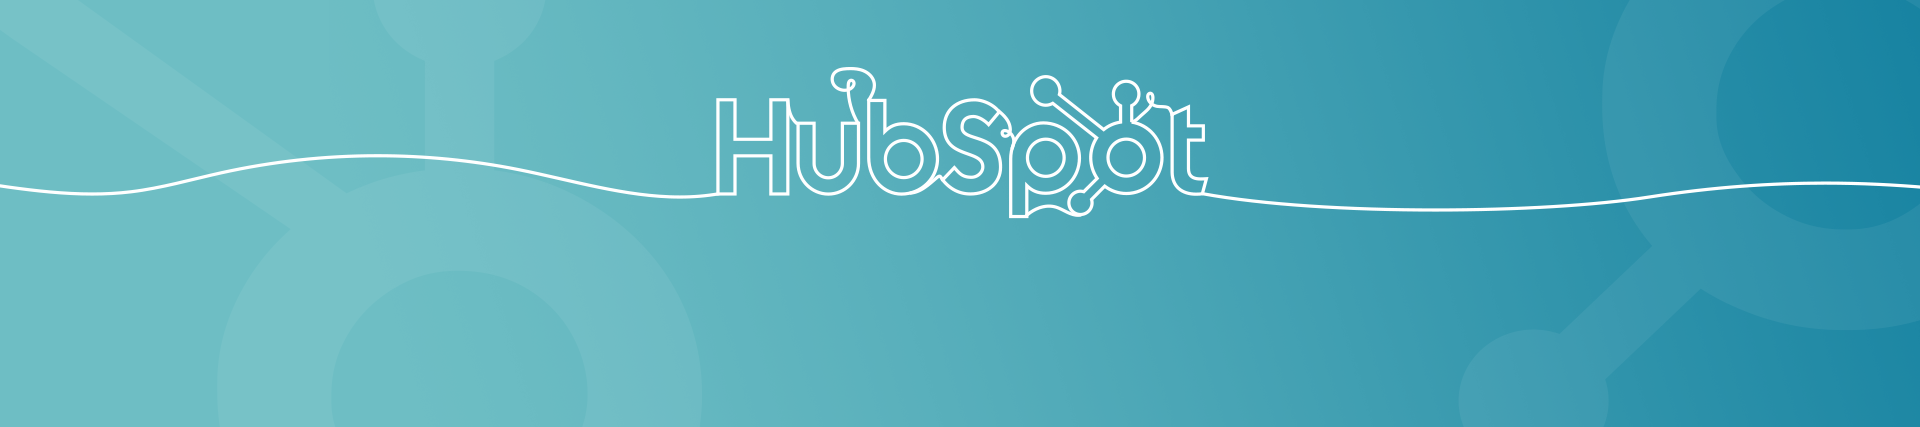 HubSpot Discounts and ways to save banner